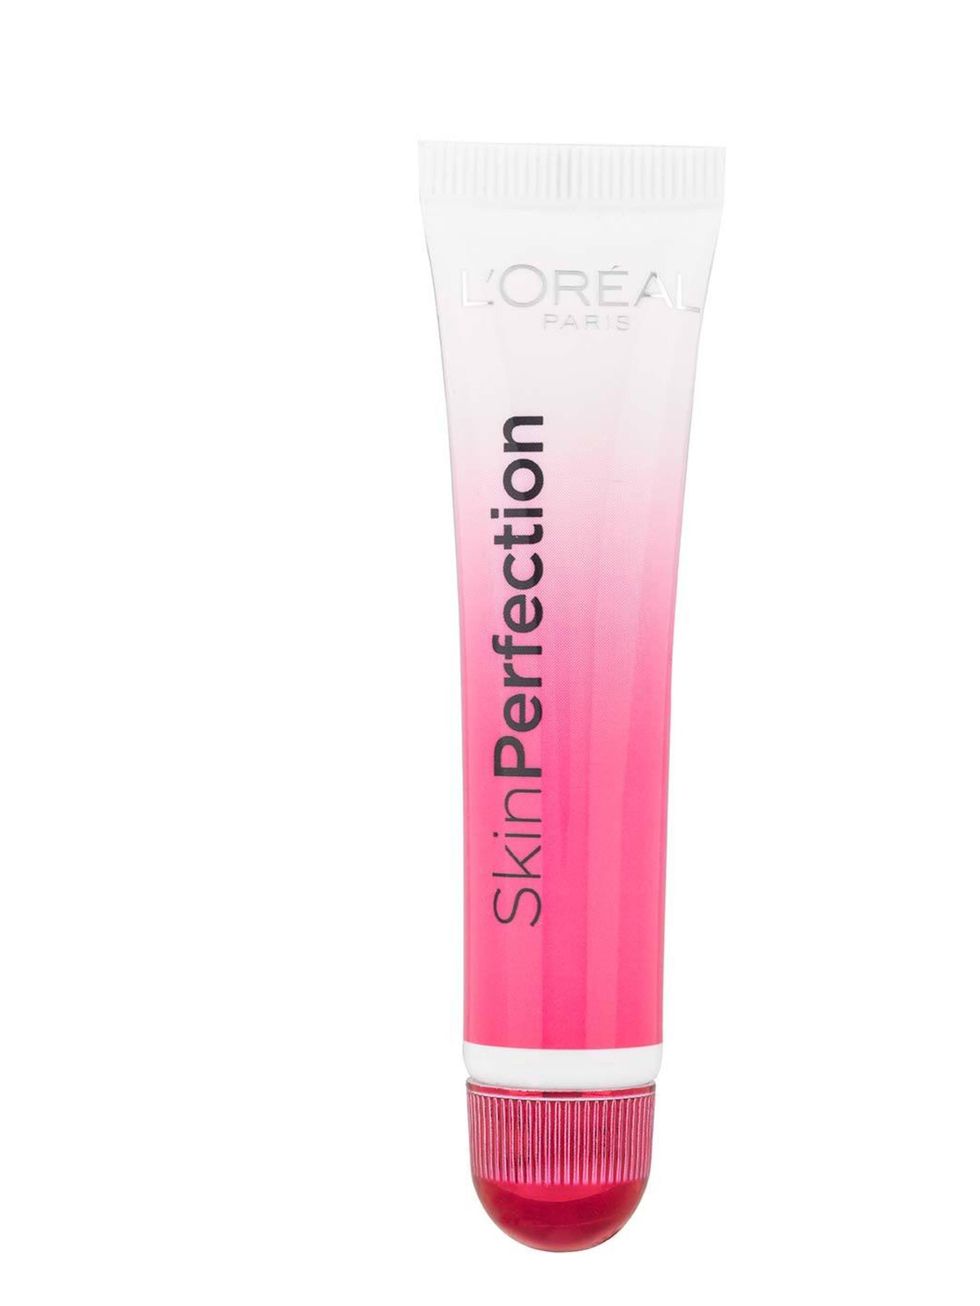 <p><a href="http://www.theukedit.com/l-oreal-paris-skin-perfection-instant-blur-15ml/10846530.html">L'Oreal Skin Perfection Magic Touch Instant Blur</a>, £12.99</p><p>Clinically proven by dermatologist specialists to enhance the quality of your <a href="h